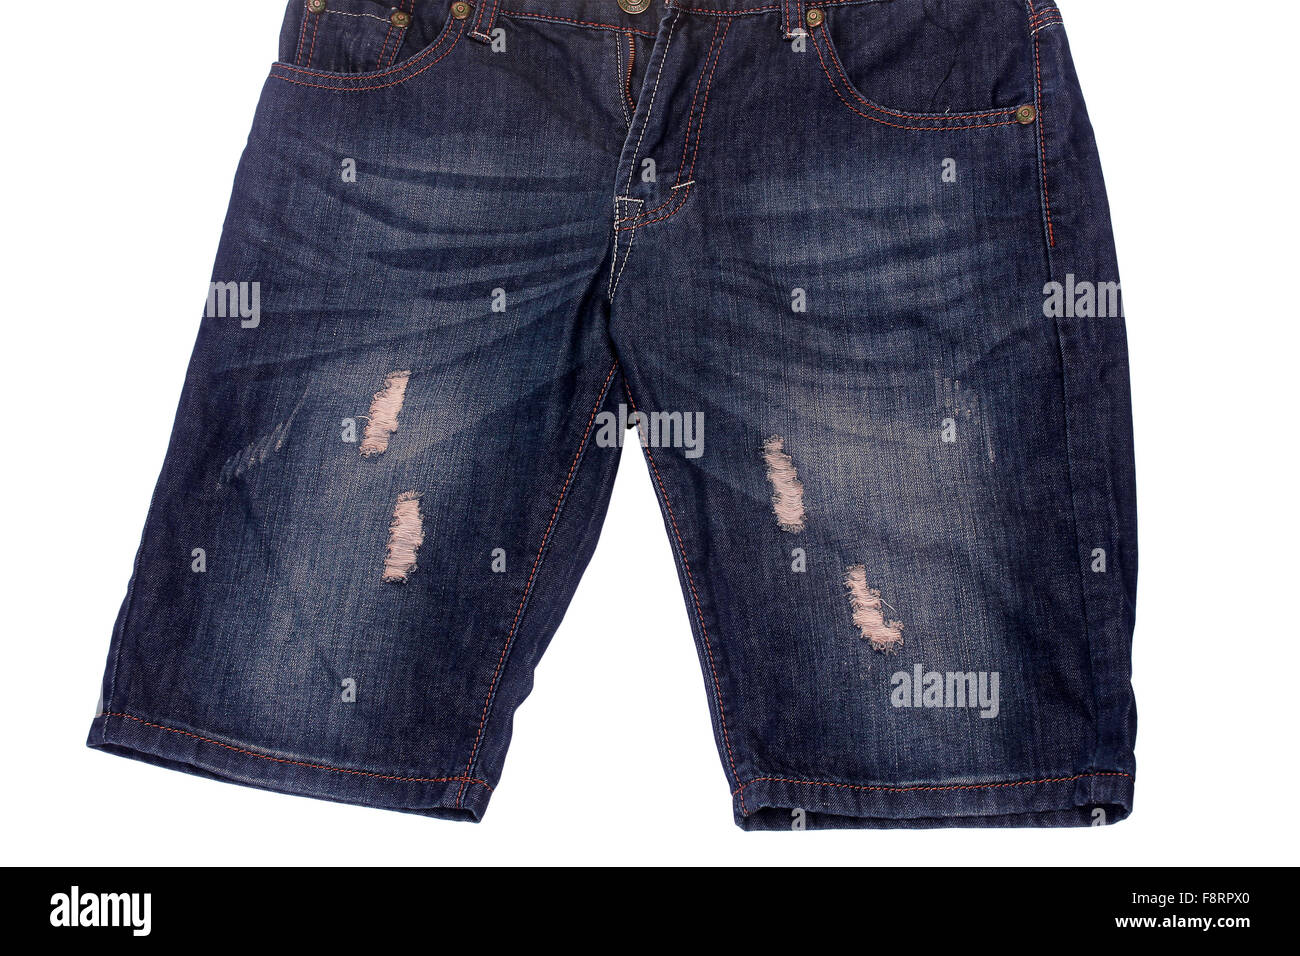 Ripped Clothes High Resolution Stock Photography and Images - Alamy